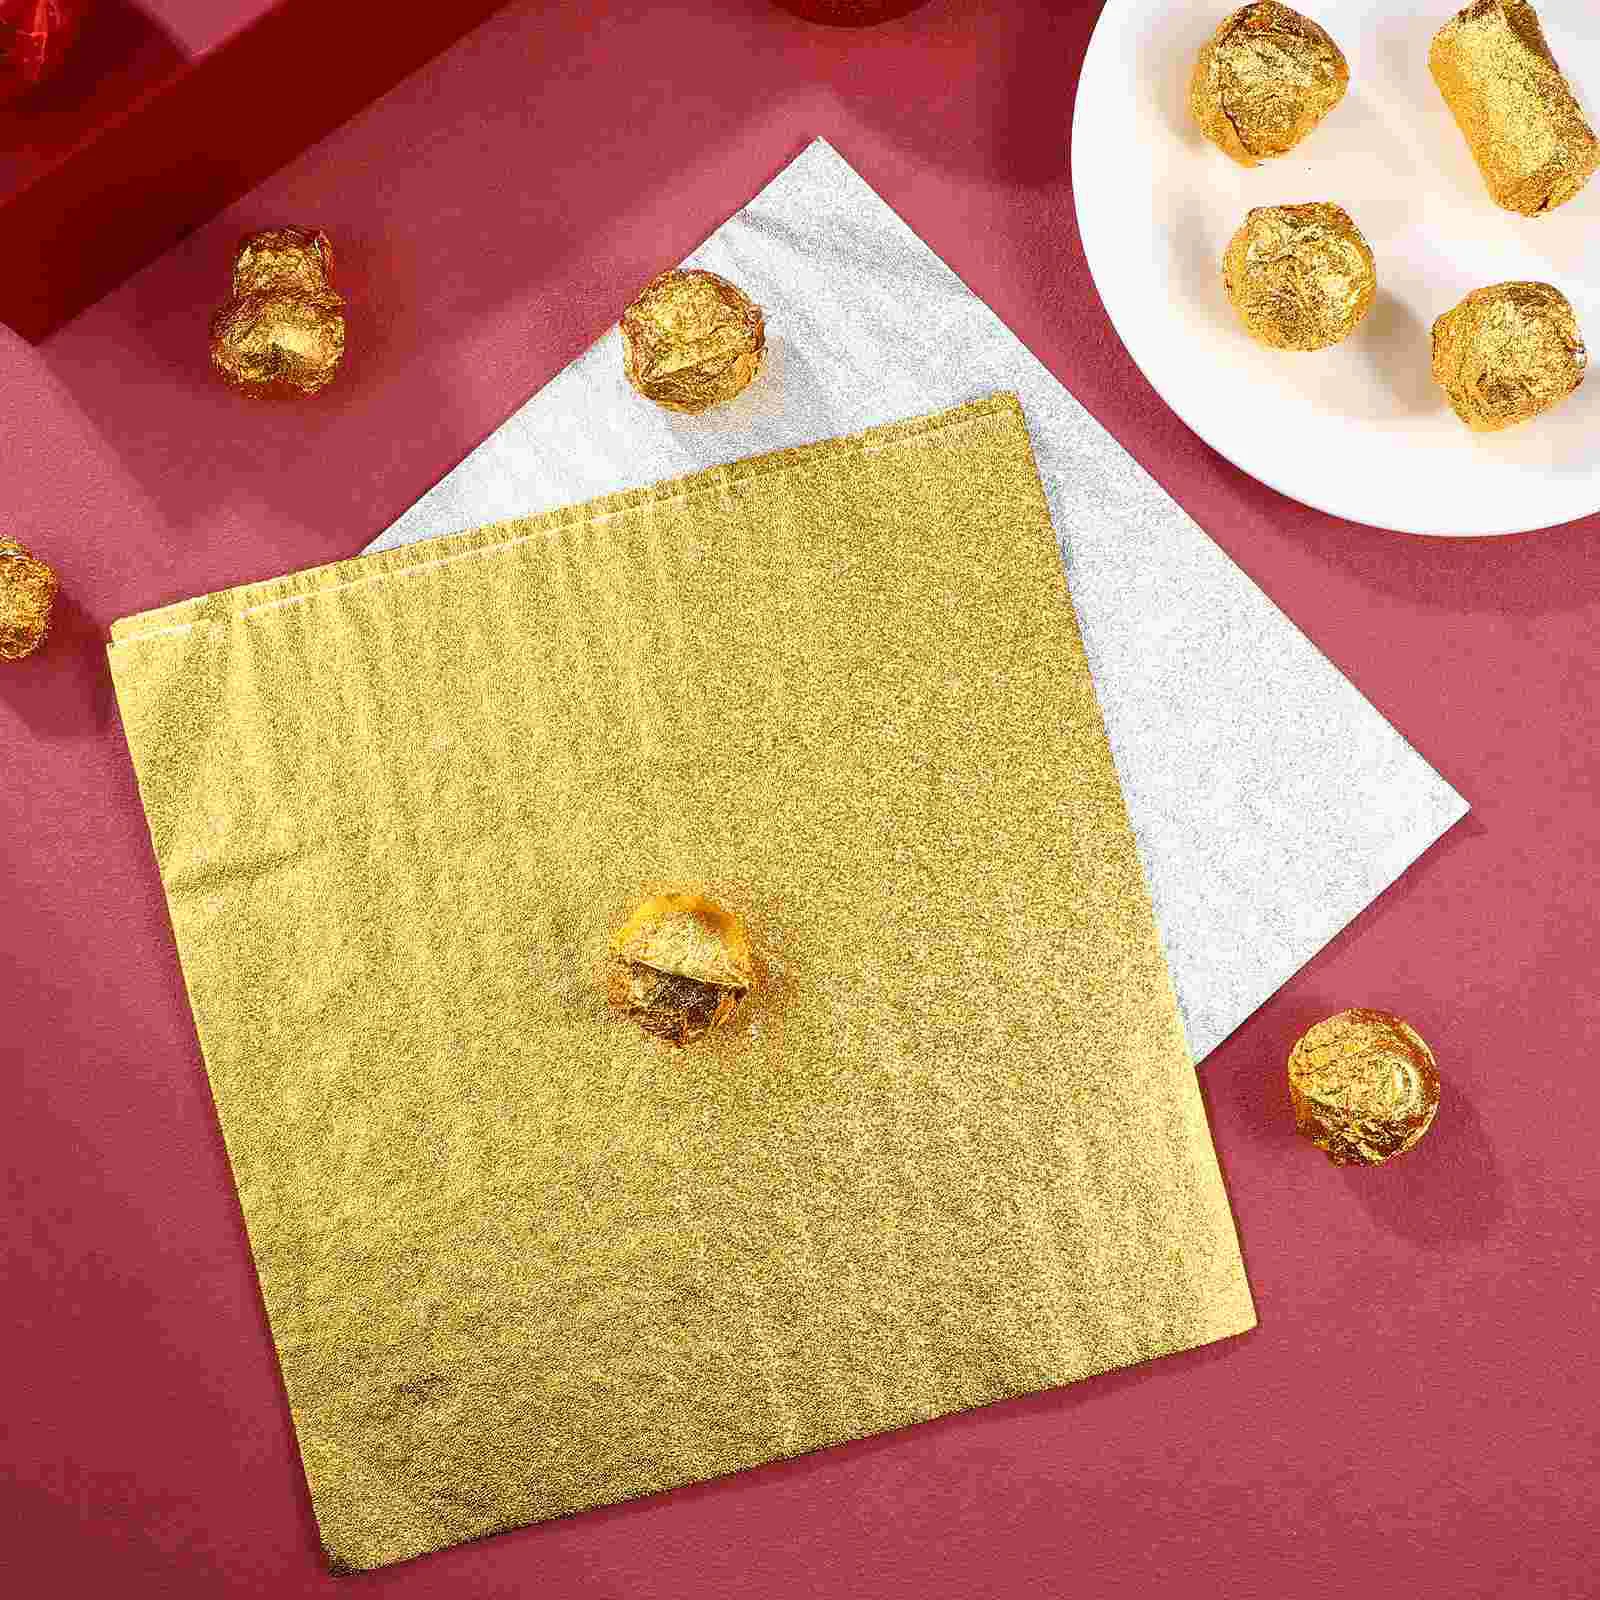 

200 Pcs Foil Wrapping Paper Chocolate Wrappers Candy Sesame Balls 20*20cm Golden